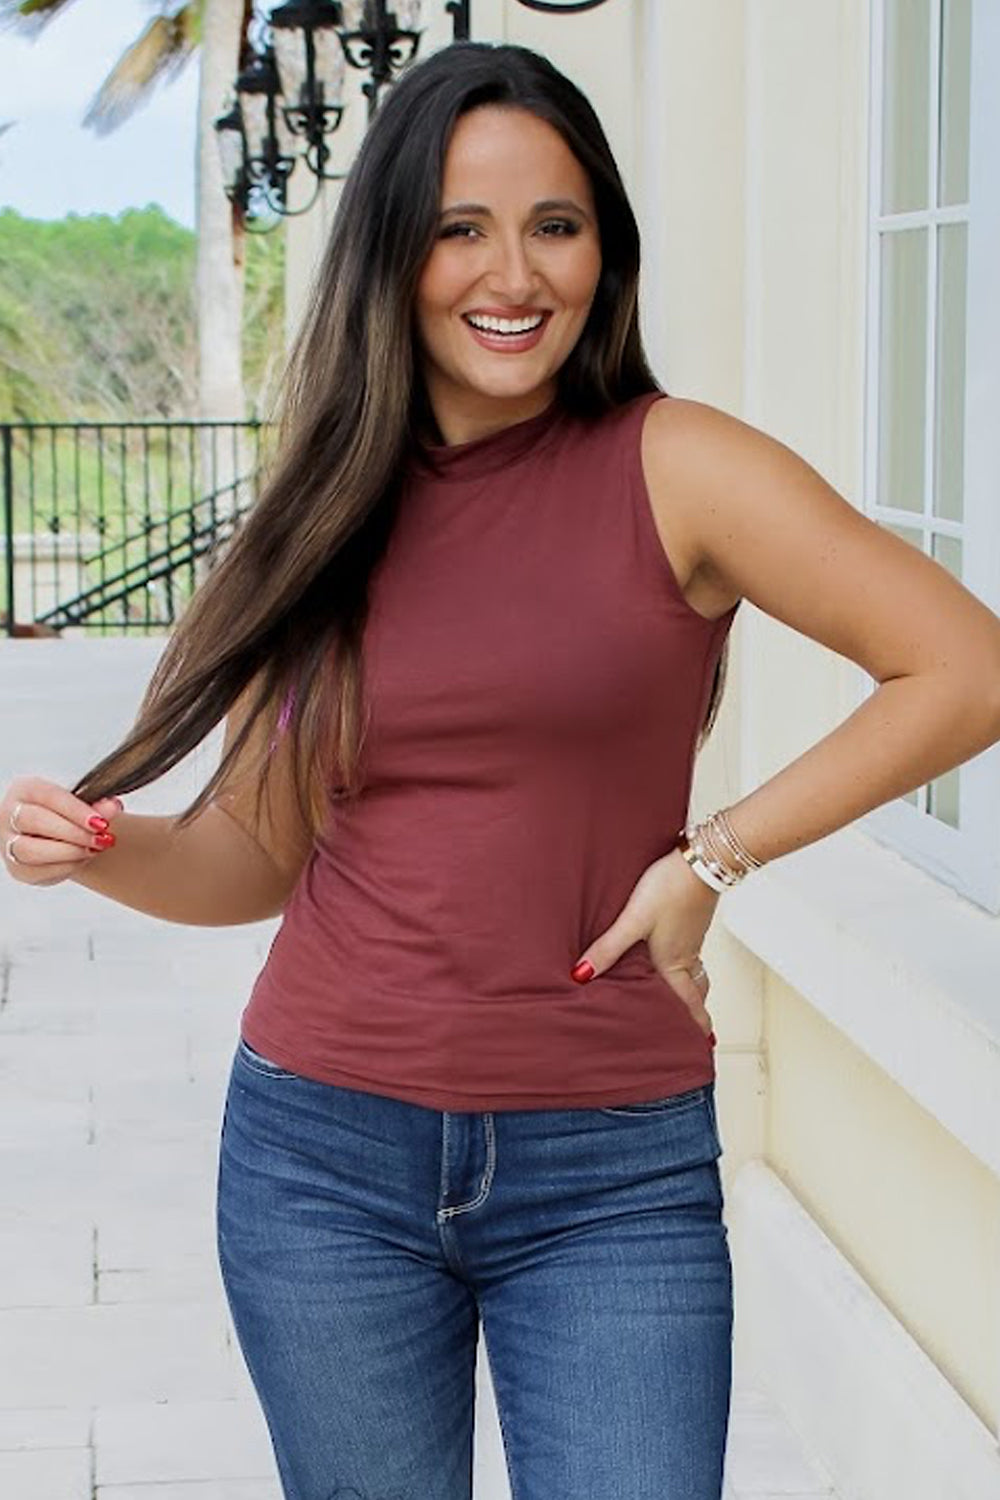 Leading The Way Mock Neck Top - Red Brown | Makk Fashions